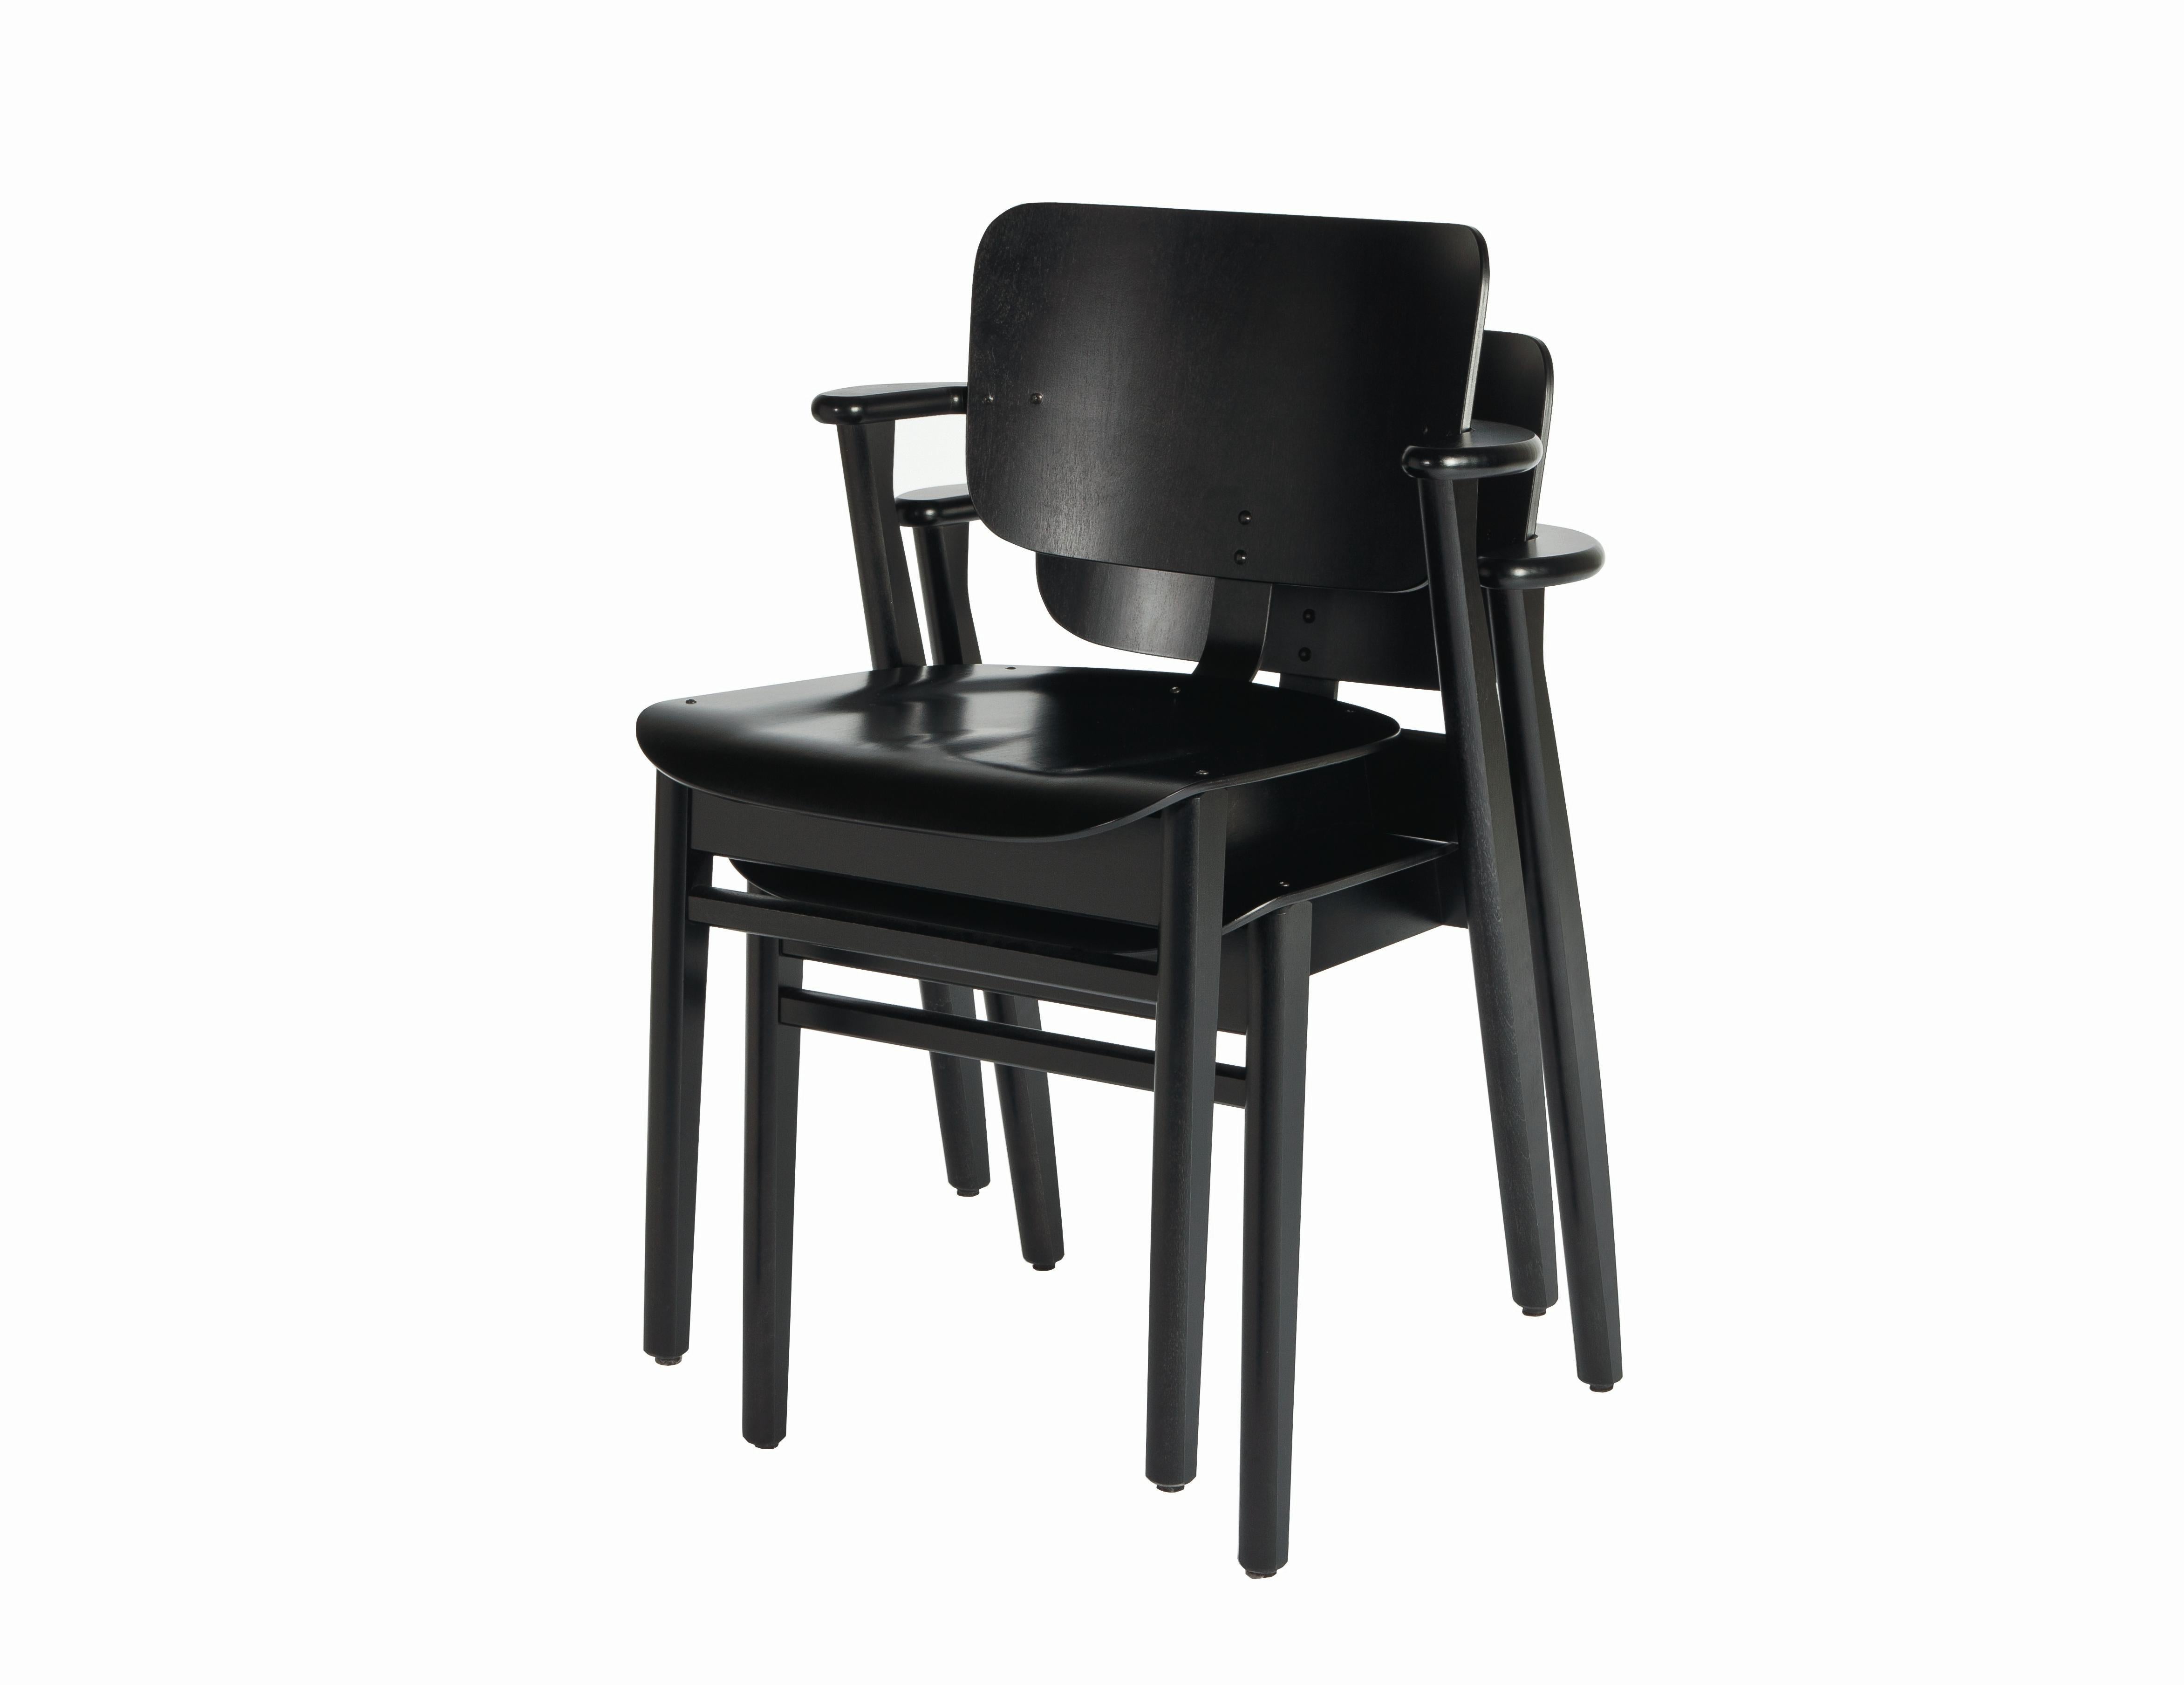 Ilmari Tapiovaara Domus chair in black birch and leather for Artek. Designed in 1946 and produced by Artek of Finland. Executed in black stained birchwood and black prestige leather on seat and back. Stackable up to four chairs. 

Price is per item.